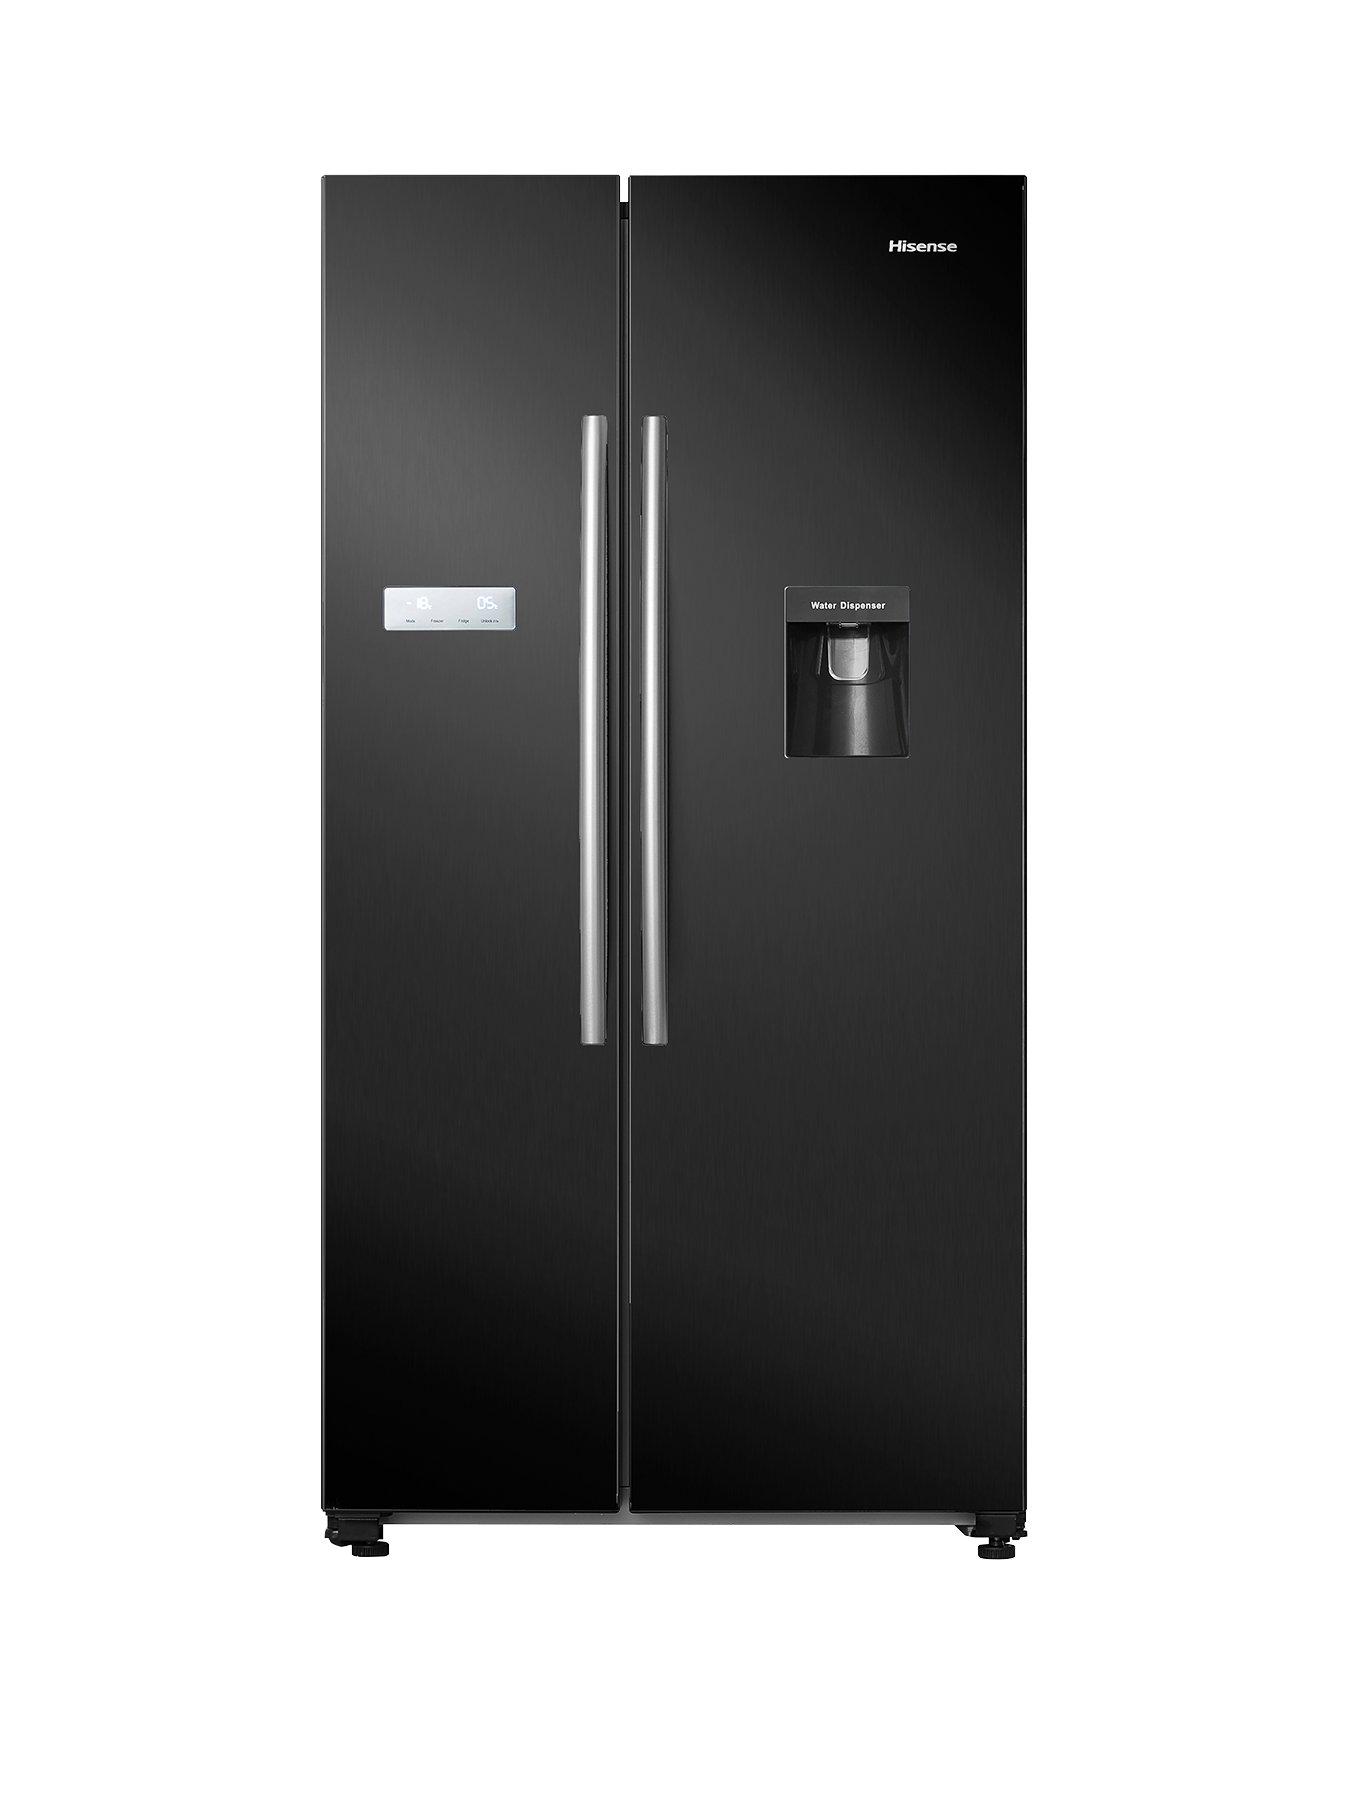 Hisense Rs741N4Wb11 90Cm Wide, Total No Frost, American-Style Fridge Freezer With Non-Plumbed Water Dispenser – Black